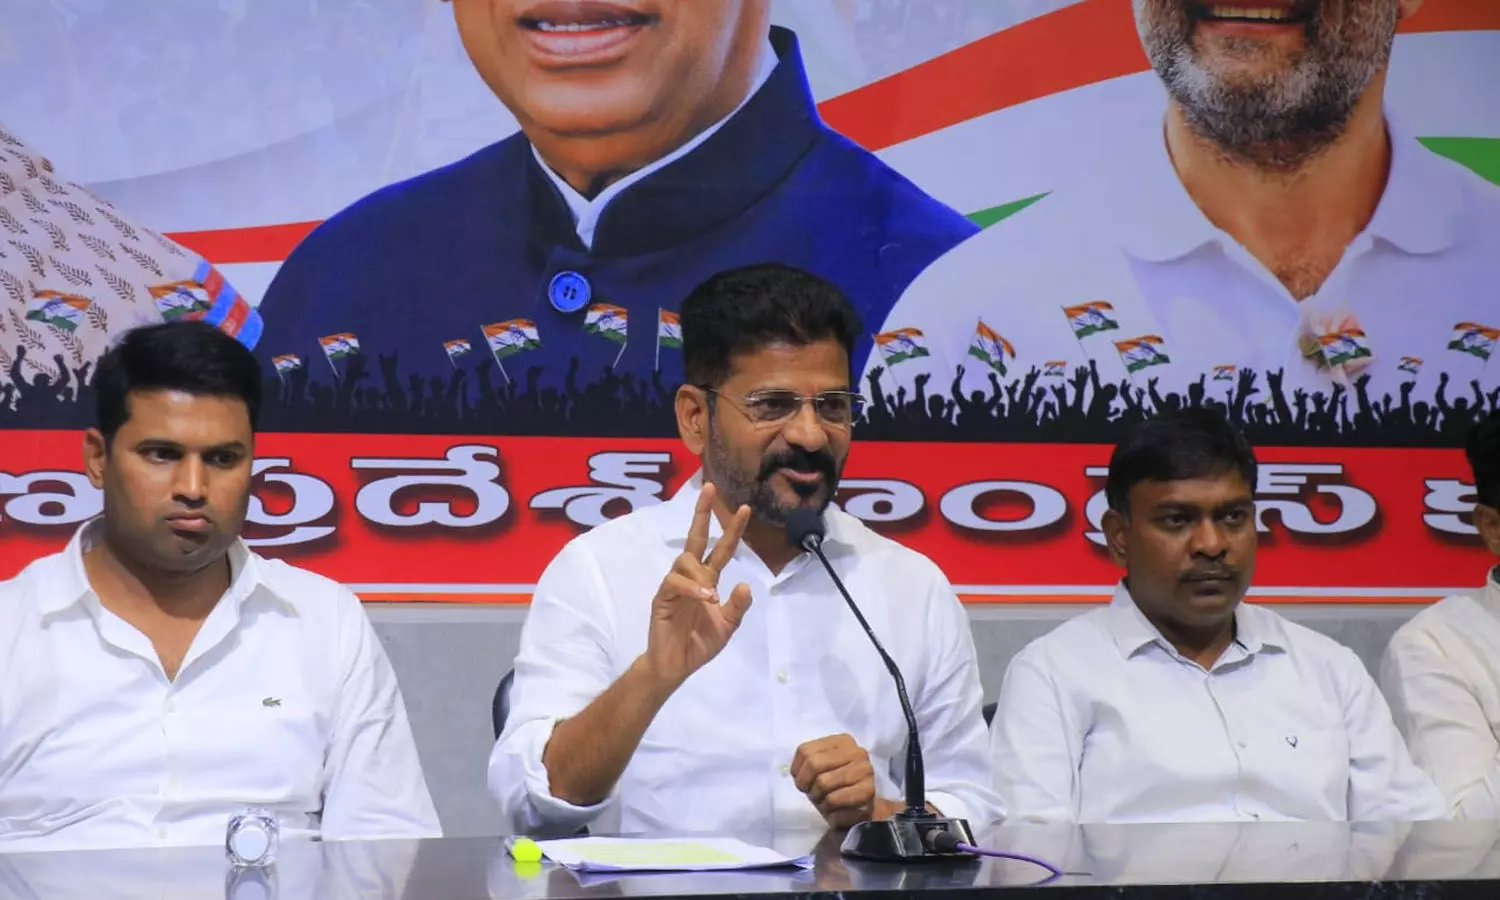 ORR lease biggest scam, Rs.1,000-crore changed hands, alleges Revanth Reddy